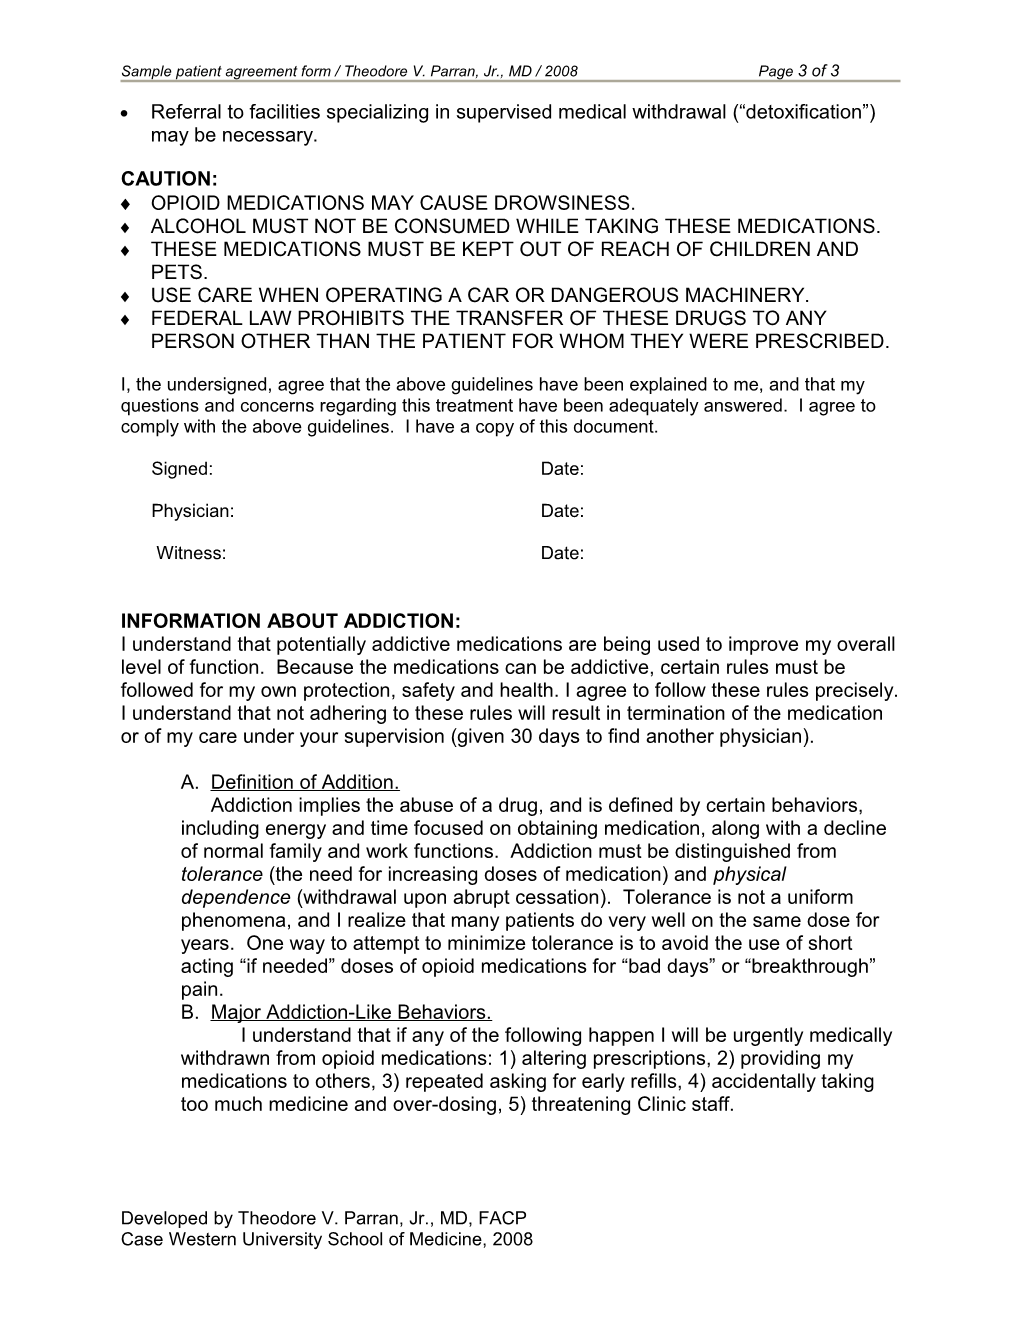 Sample Patient Agreement Form / Theodore V. Parran, Jr., MD / 2008Page 1 of 3